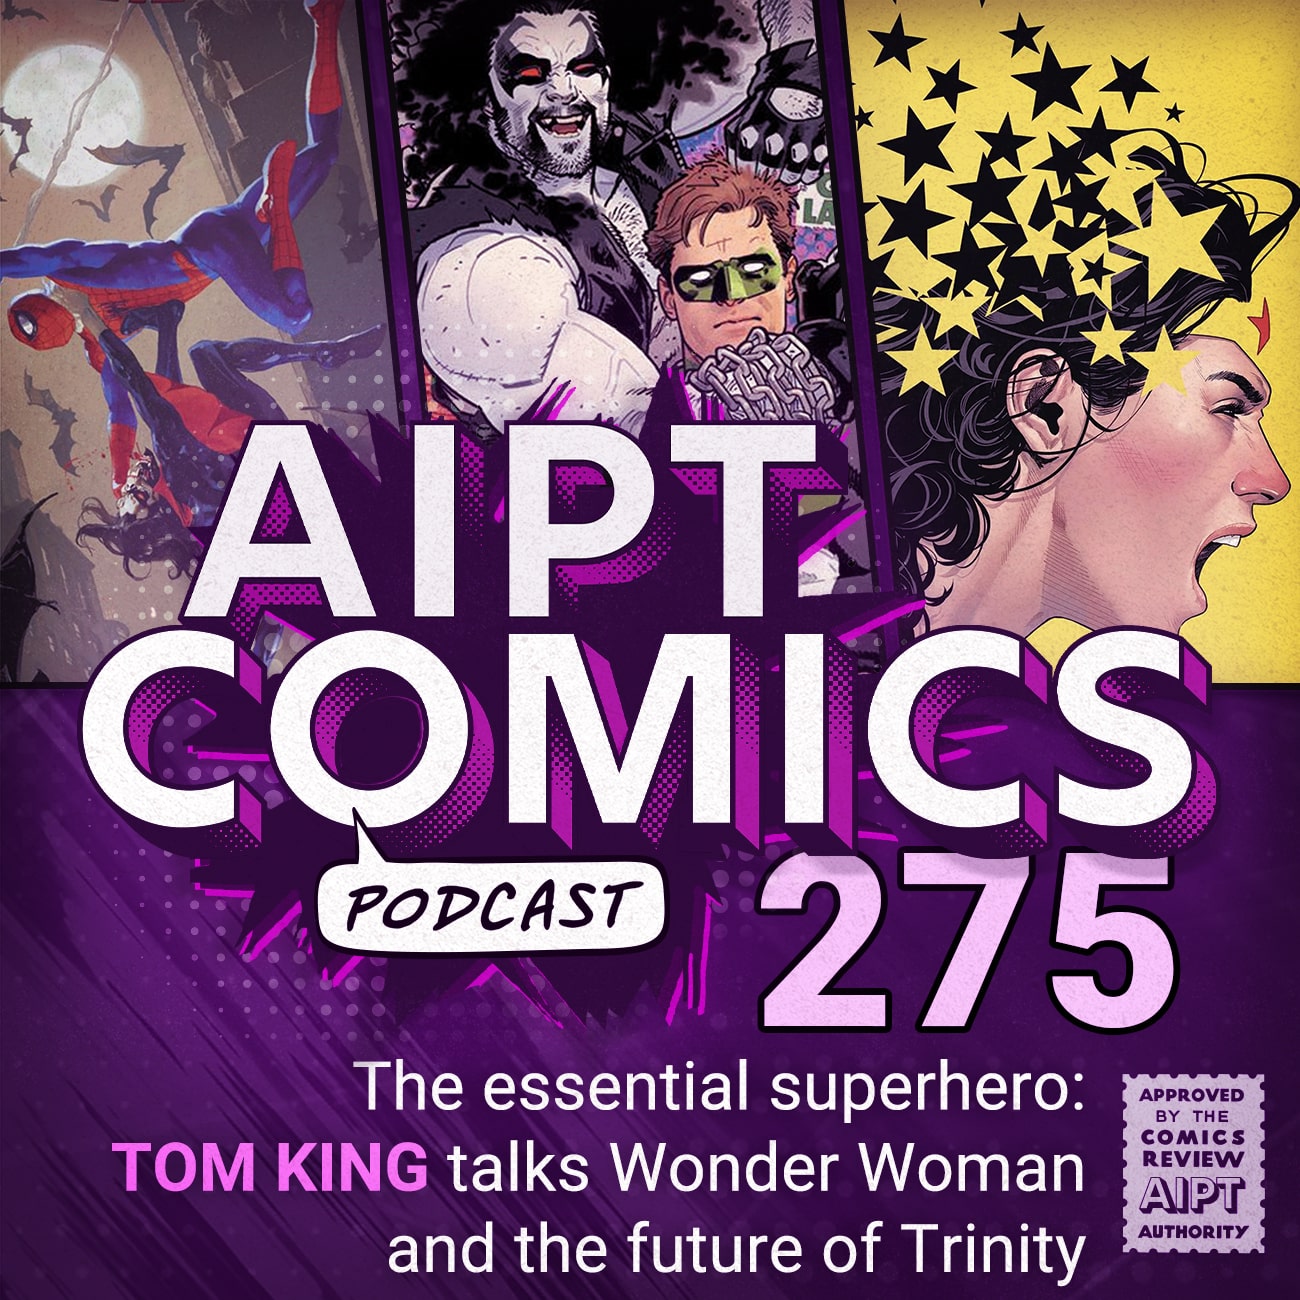 AIPT Comics Podcast Episode 275: The essential superhero: Tom King talks 'Wonder Woman' and the future of Trinity